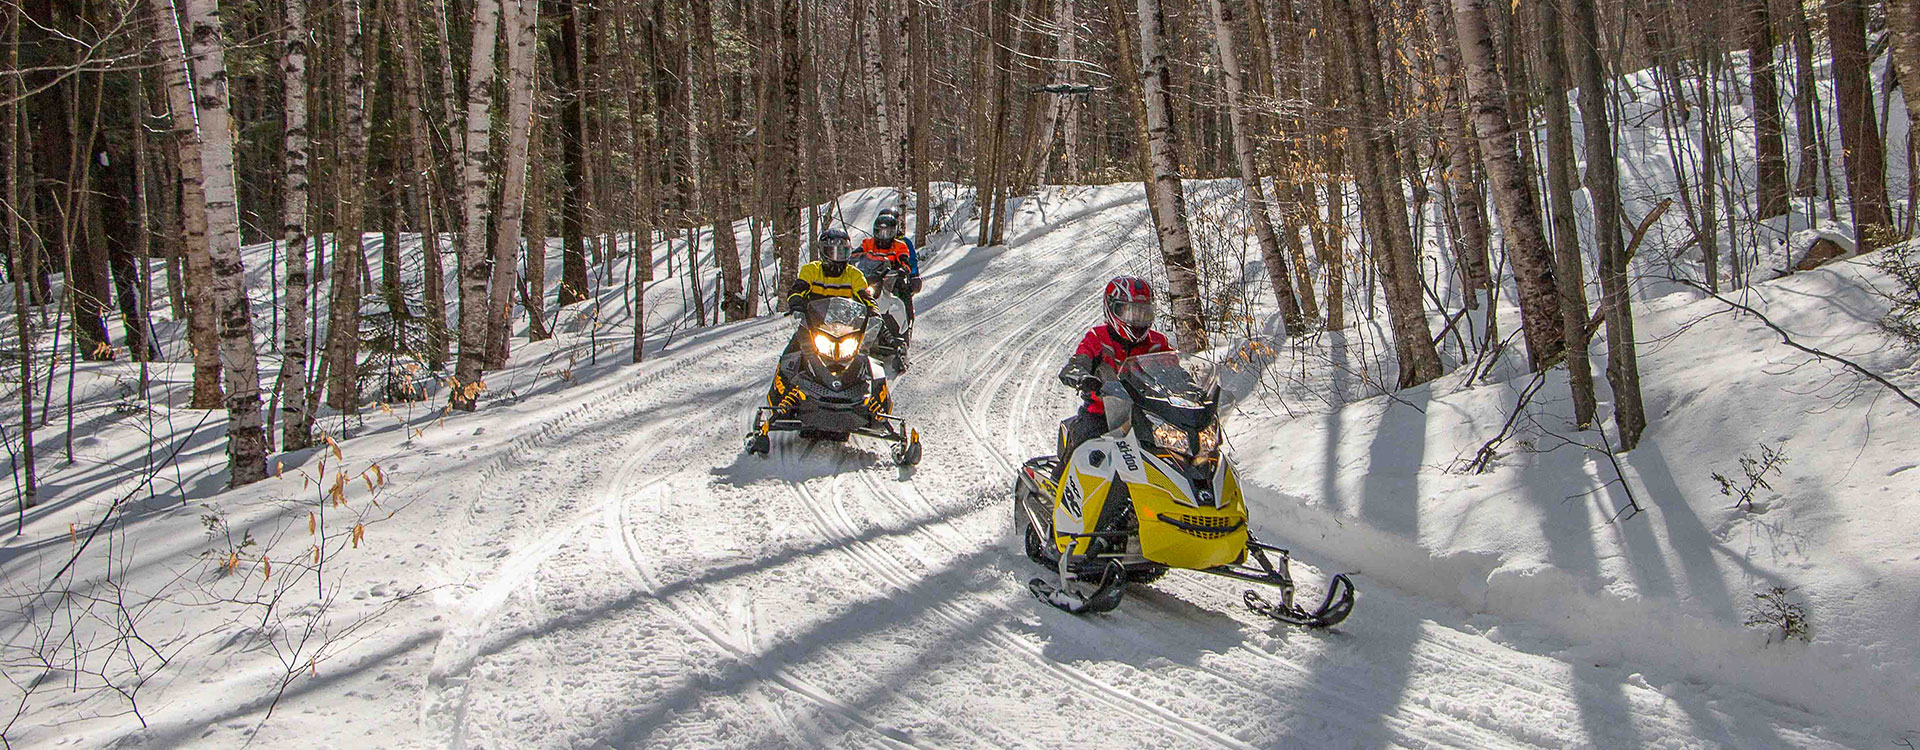 snowmobiles on a snowy track